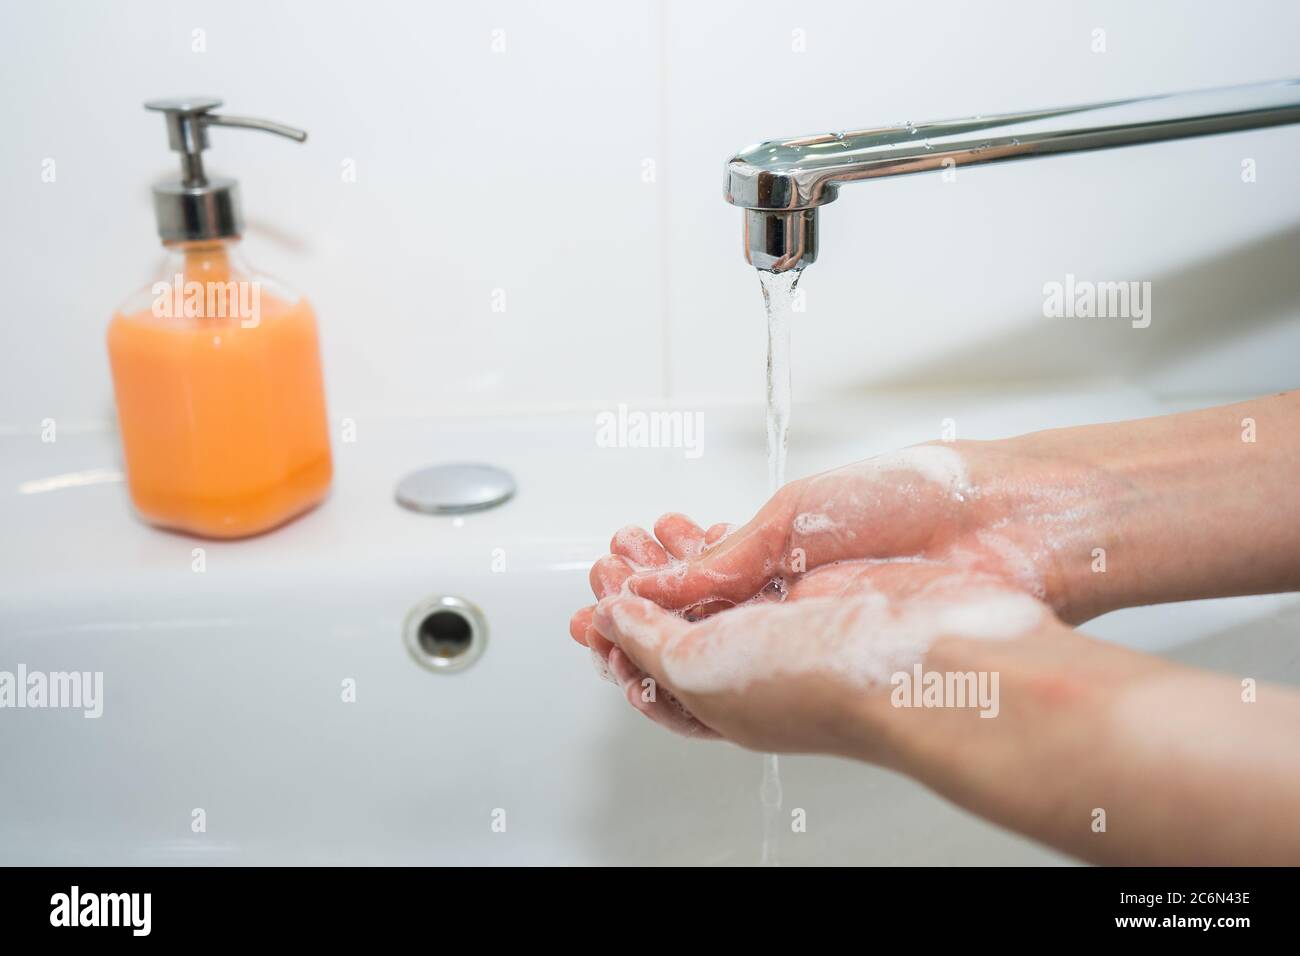 Hand washing with soap. Girl washes her hands with antibacterial soap  Stock Photo